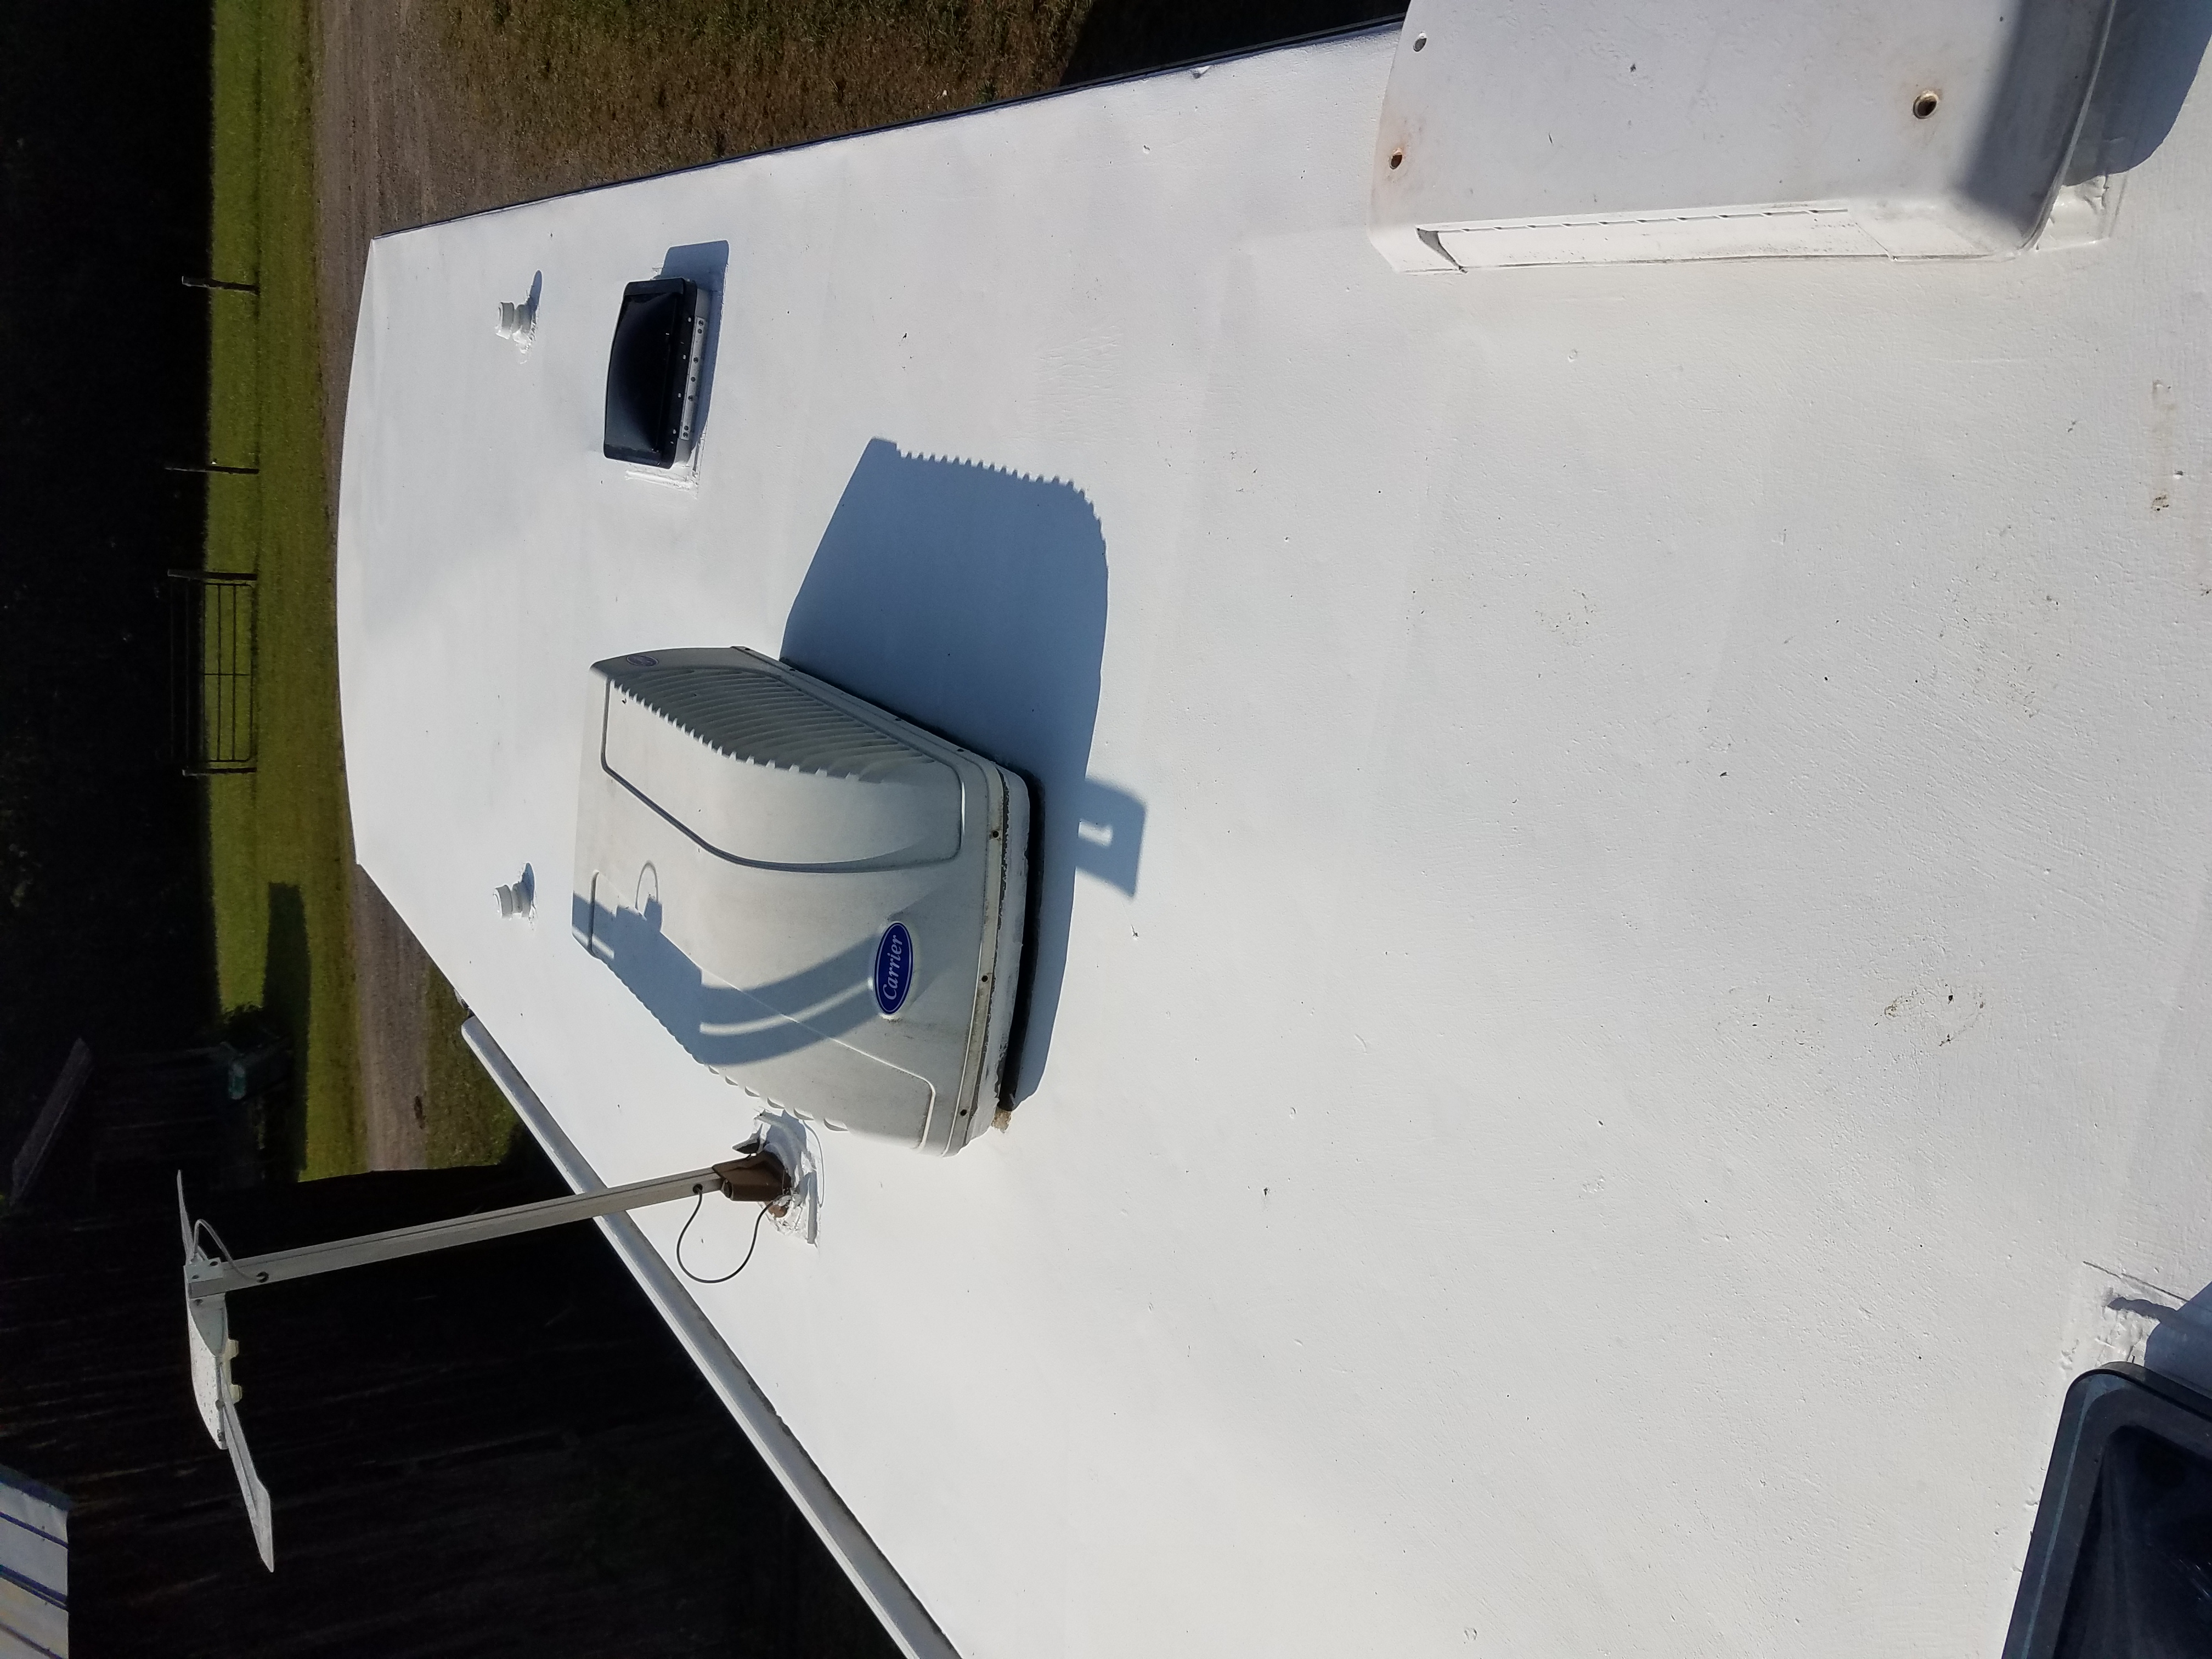 The roof of the travel trailer, freshly painted and white.